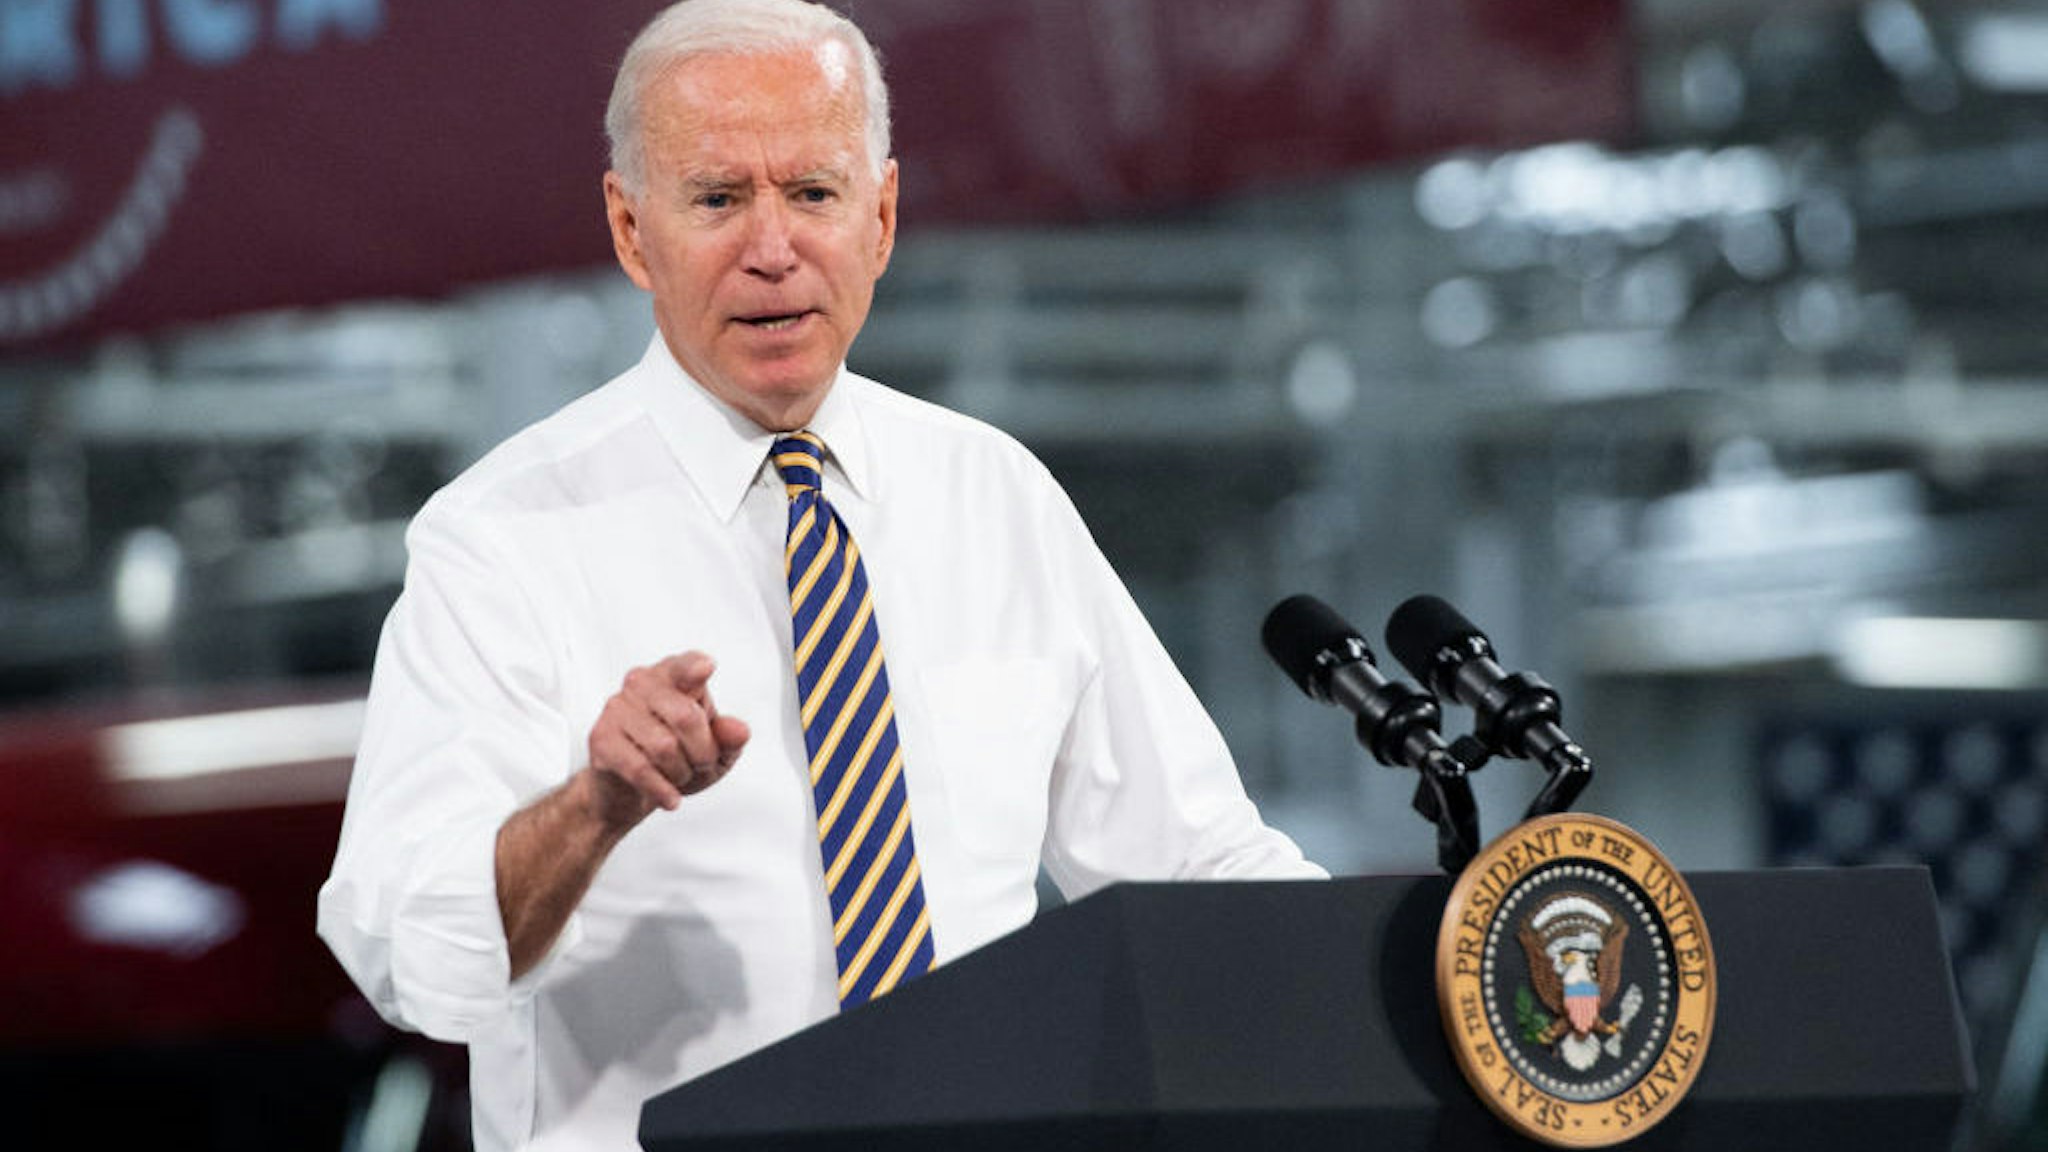 US President Joe Biden speaks about American manufacturing and the American workforce after touring the Mack Trucks Lehigh Valley Operations Manufacturing Facility in Macungie, Pennsylvania on July 28, 2021. (Photo by SAUL LOEB / AFP) (Photo by SAUL LOEB/AFP via Getty Images)